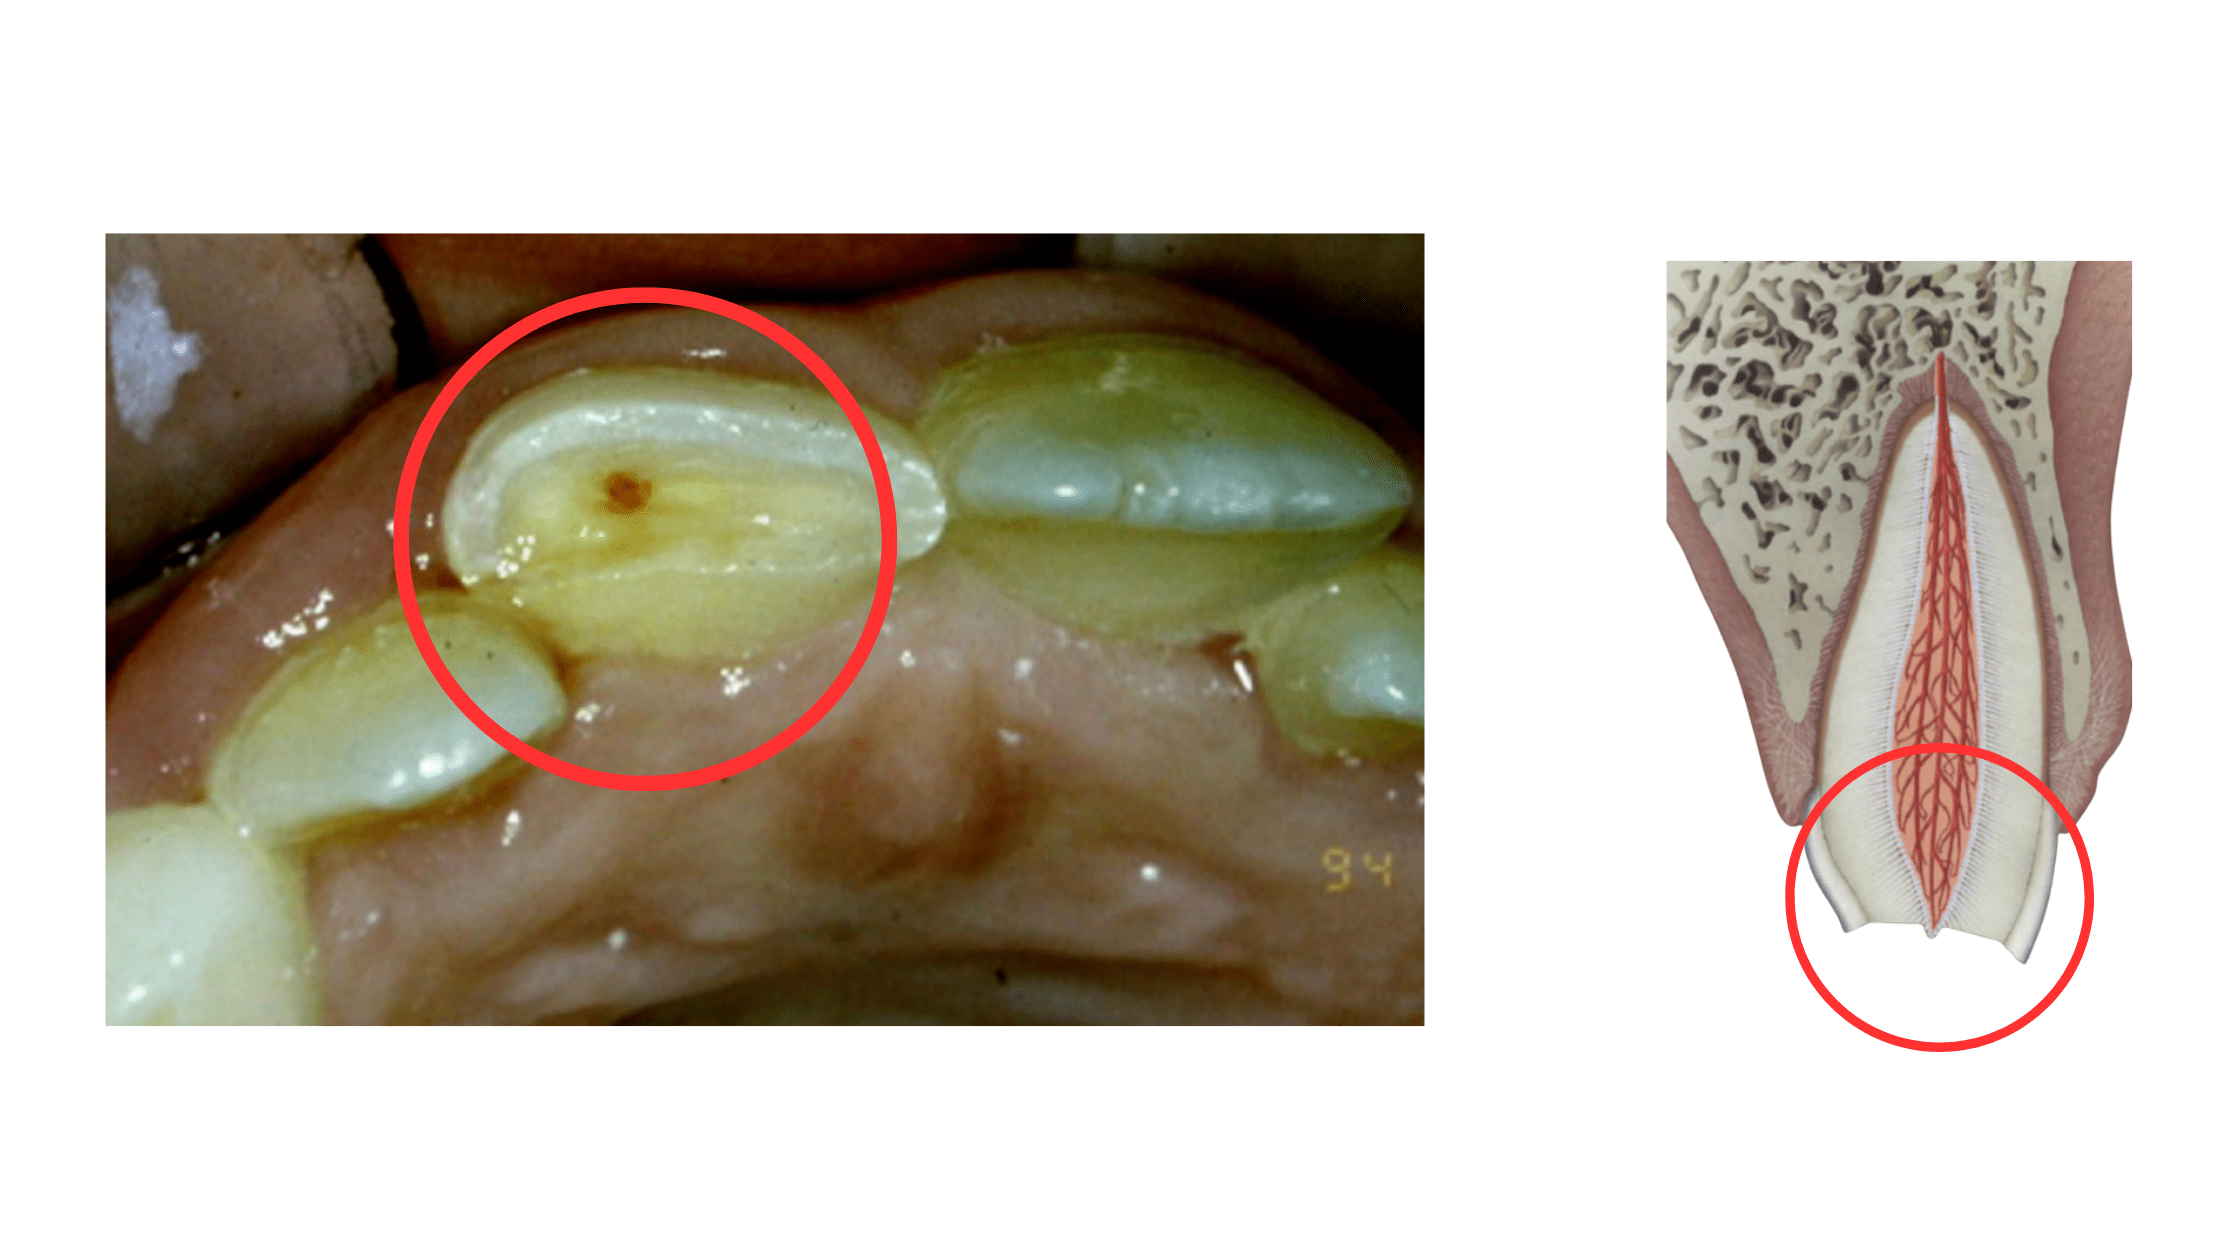 Exposed tooth nerves due to trauma